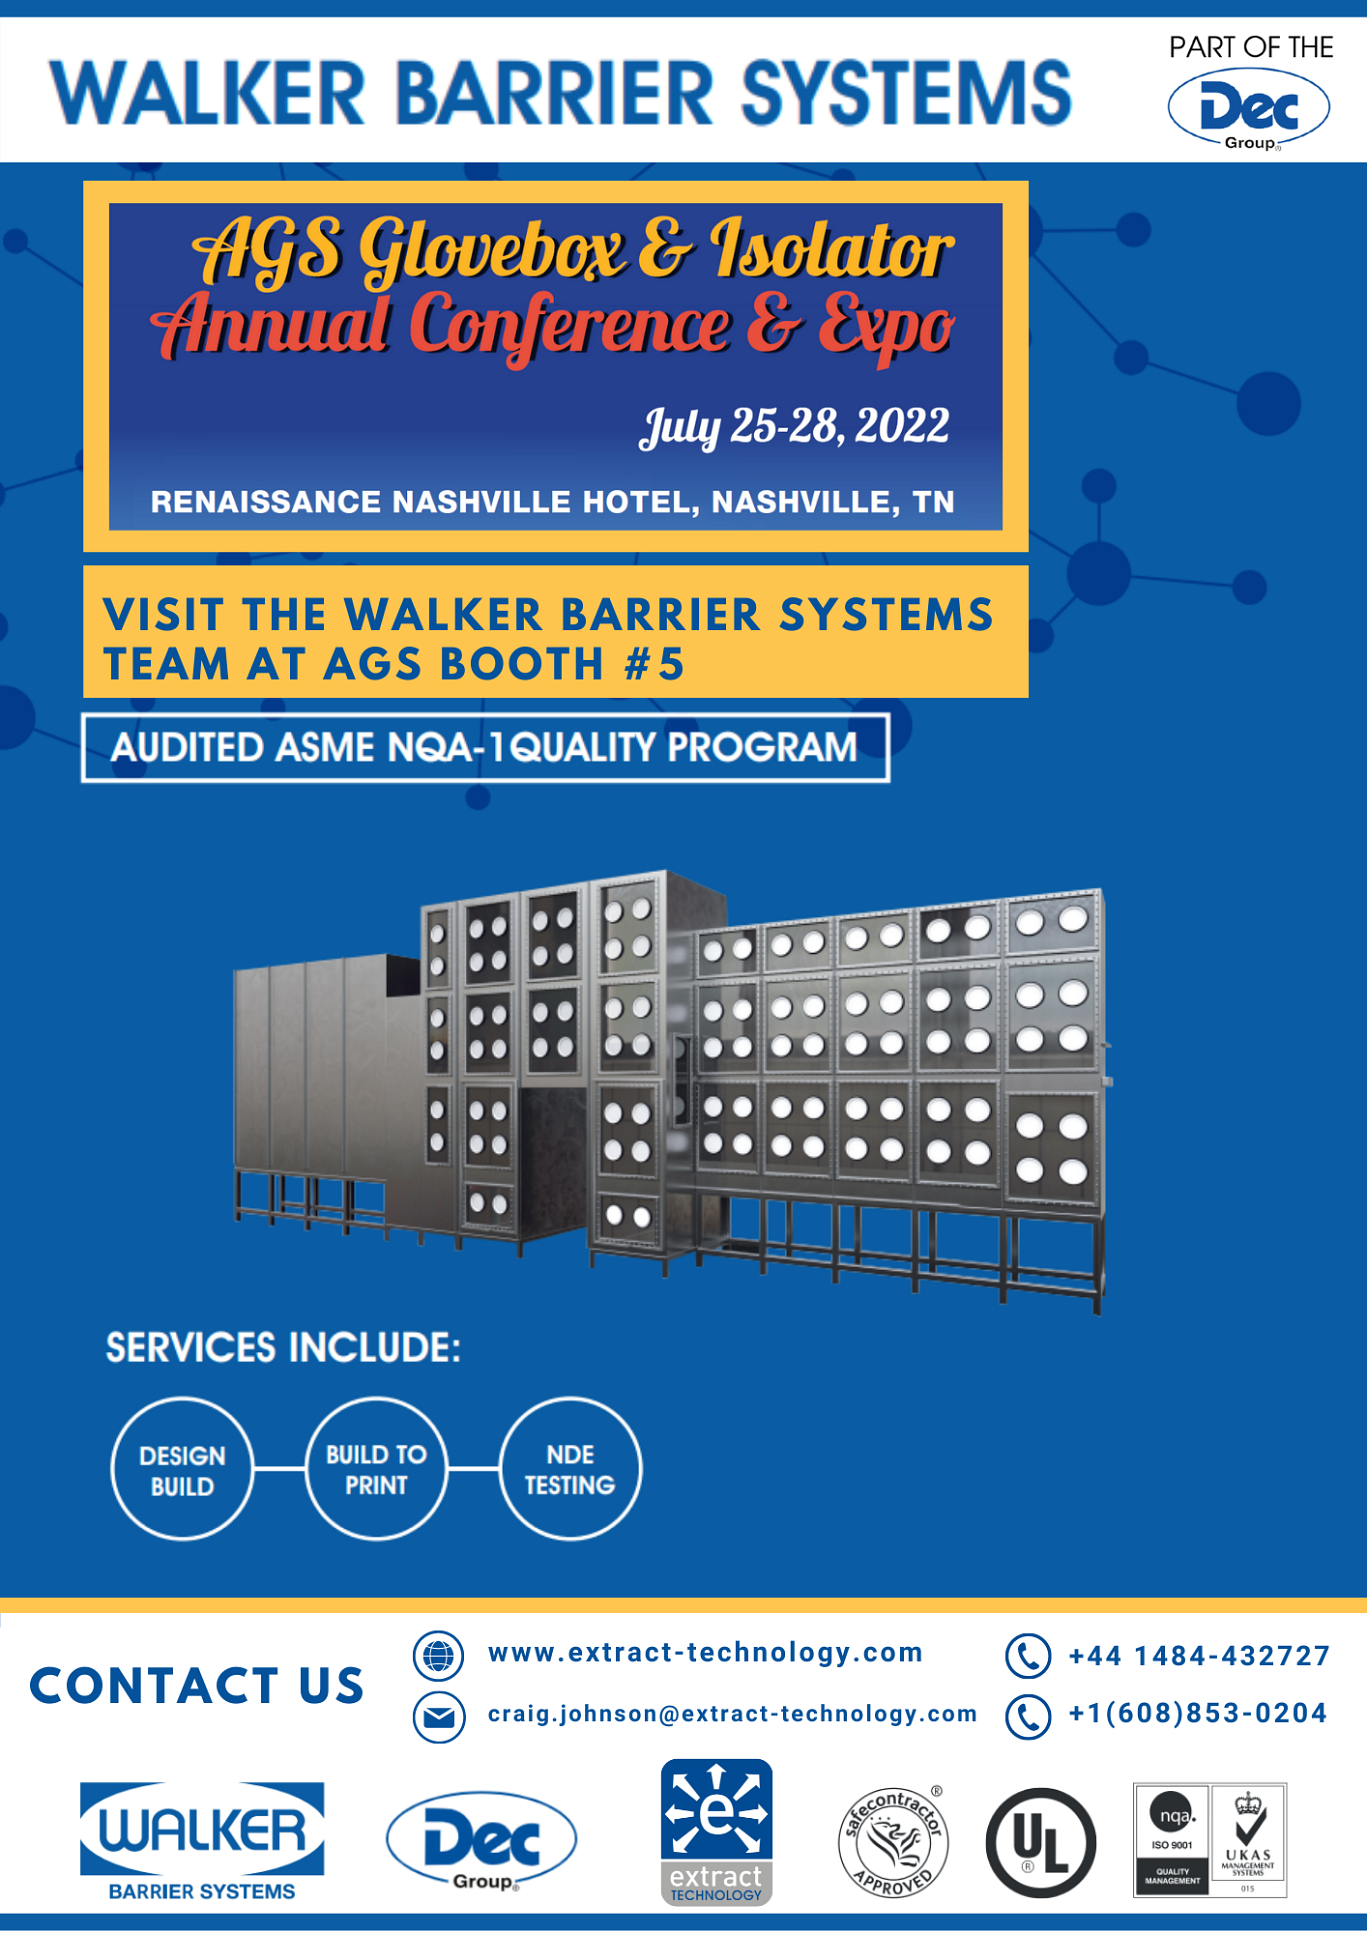 Walker Barrier Systems at the American Glovebox Society